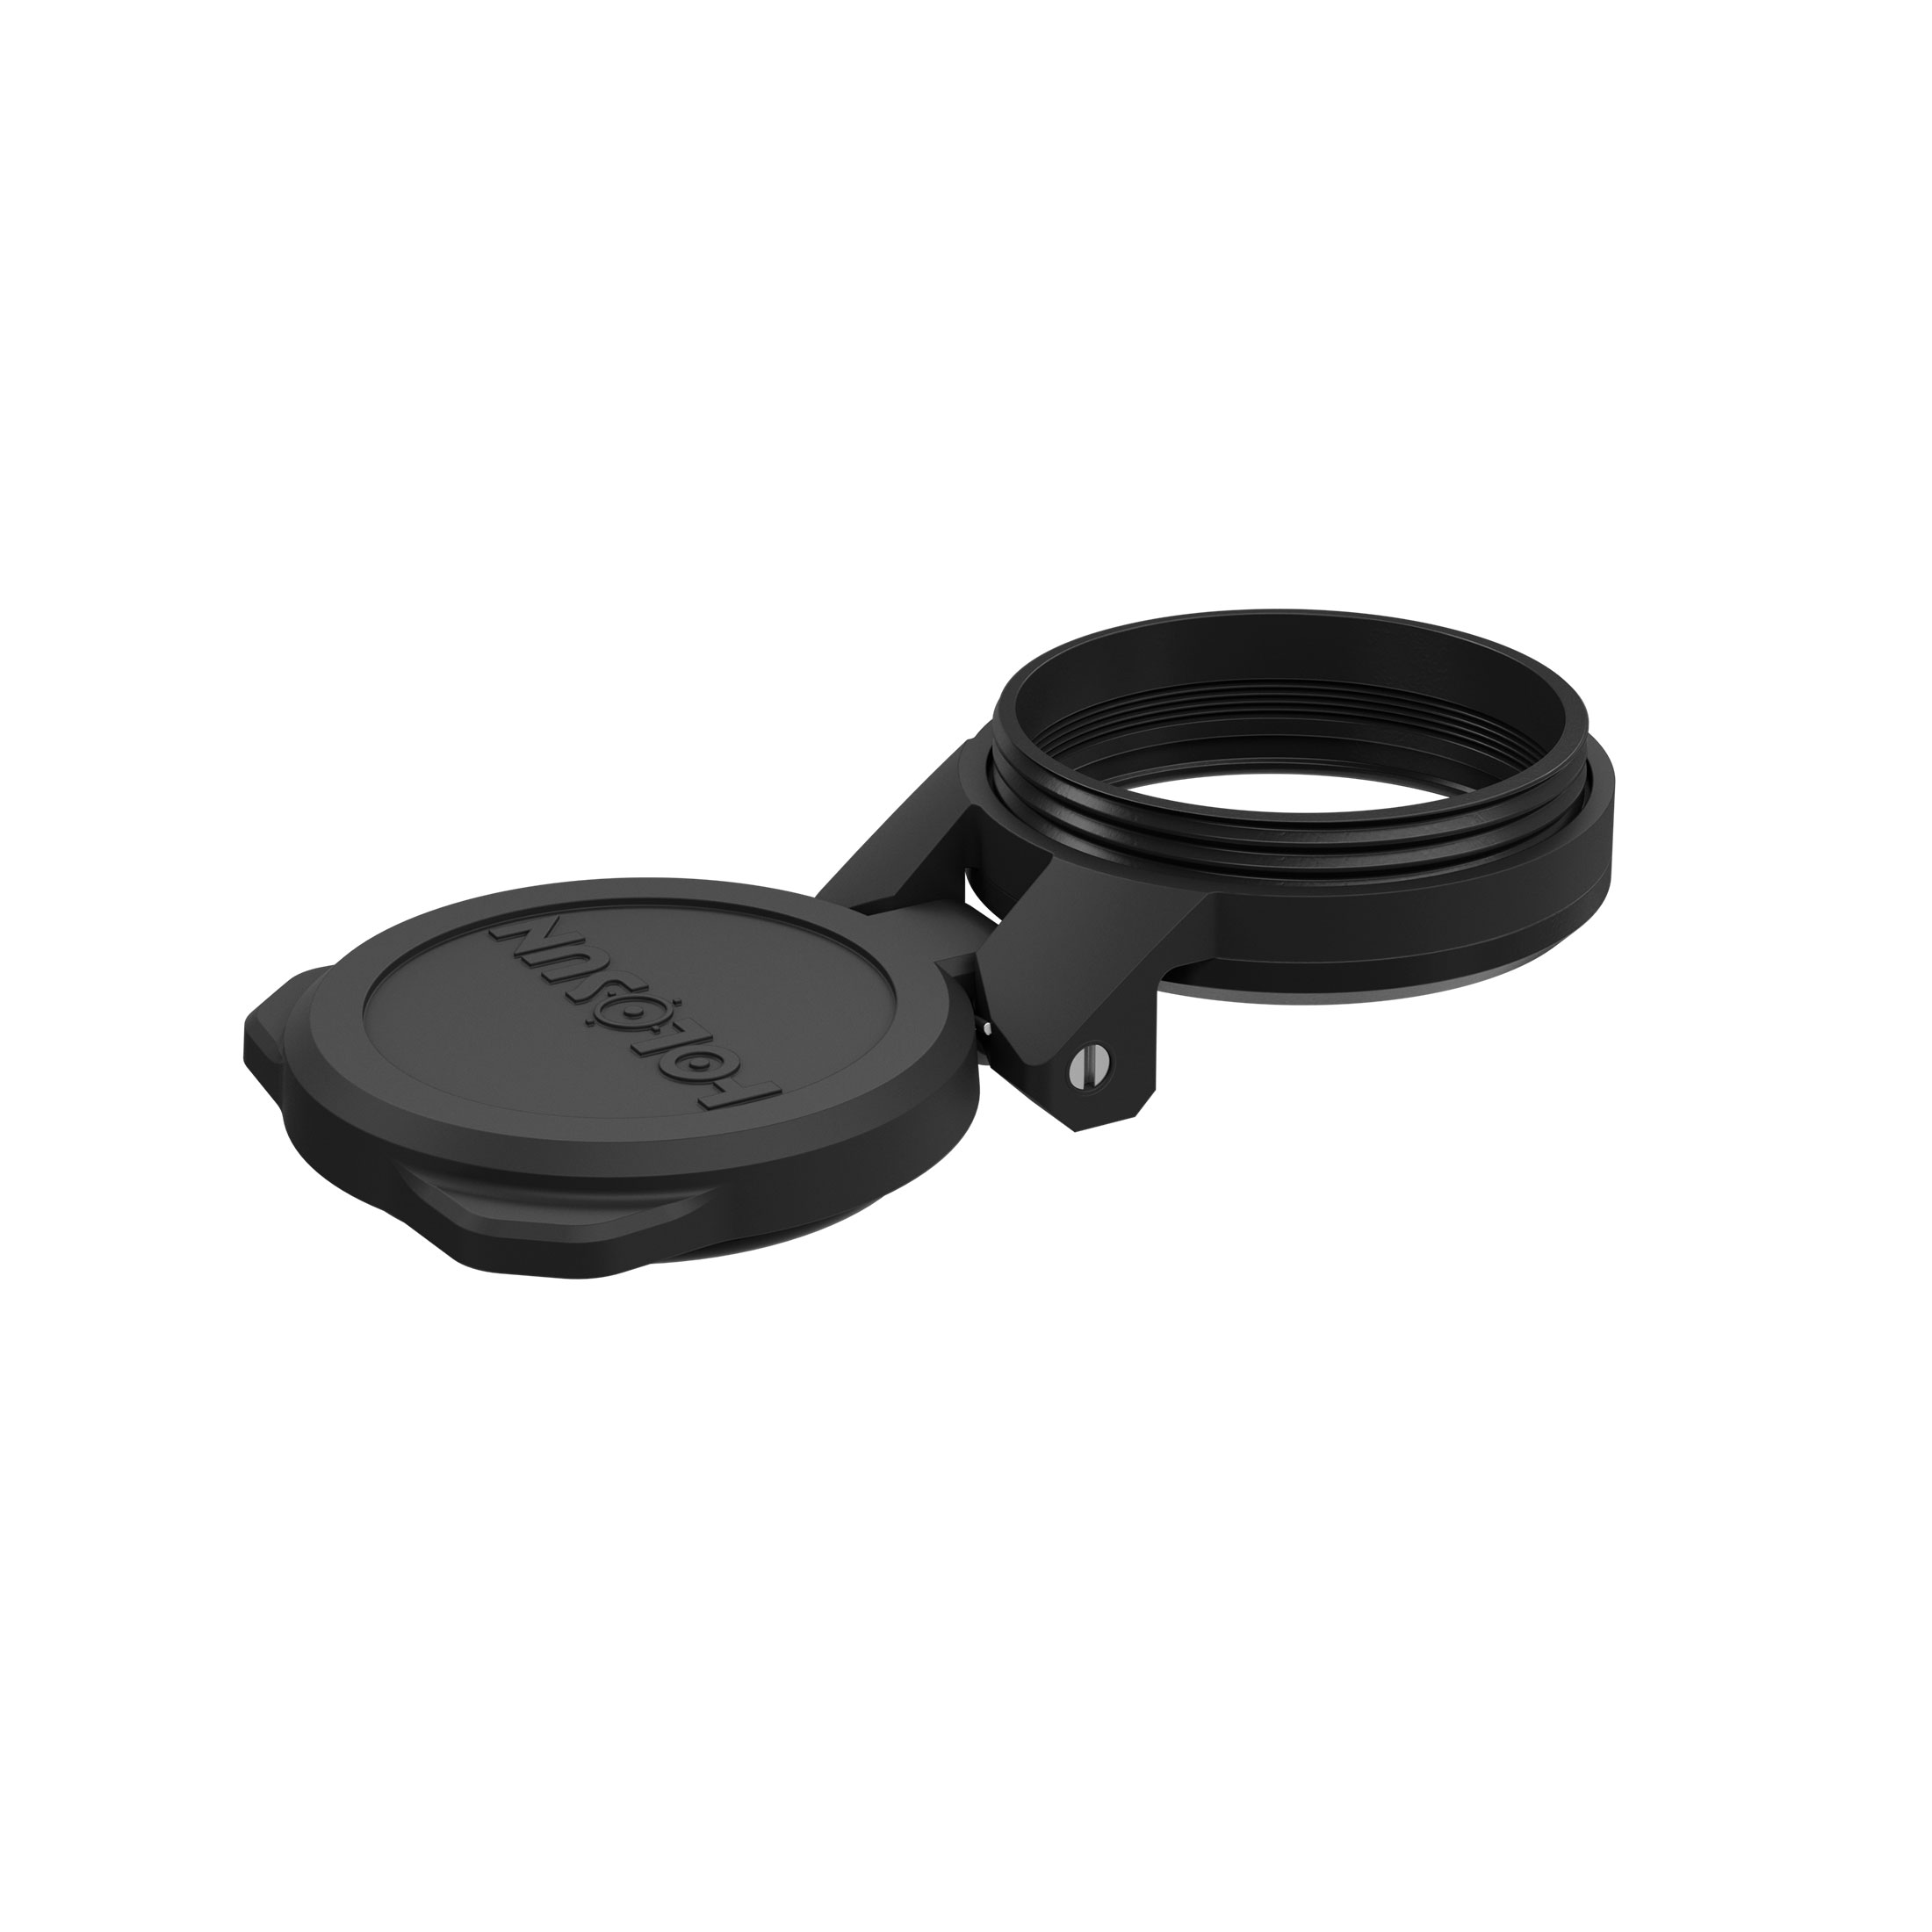 Holosun Flip Cap small HS-FLIP-CAP-SMALL accessory for Holosun red dot sights